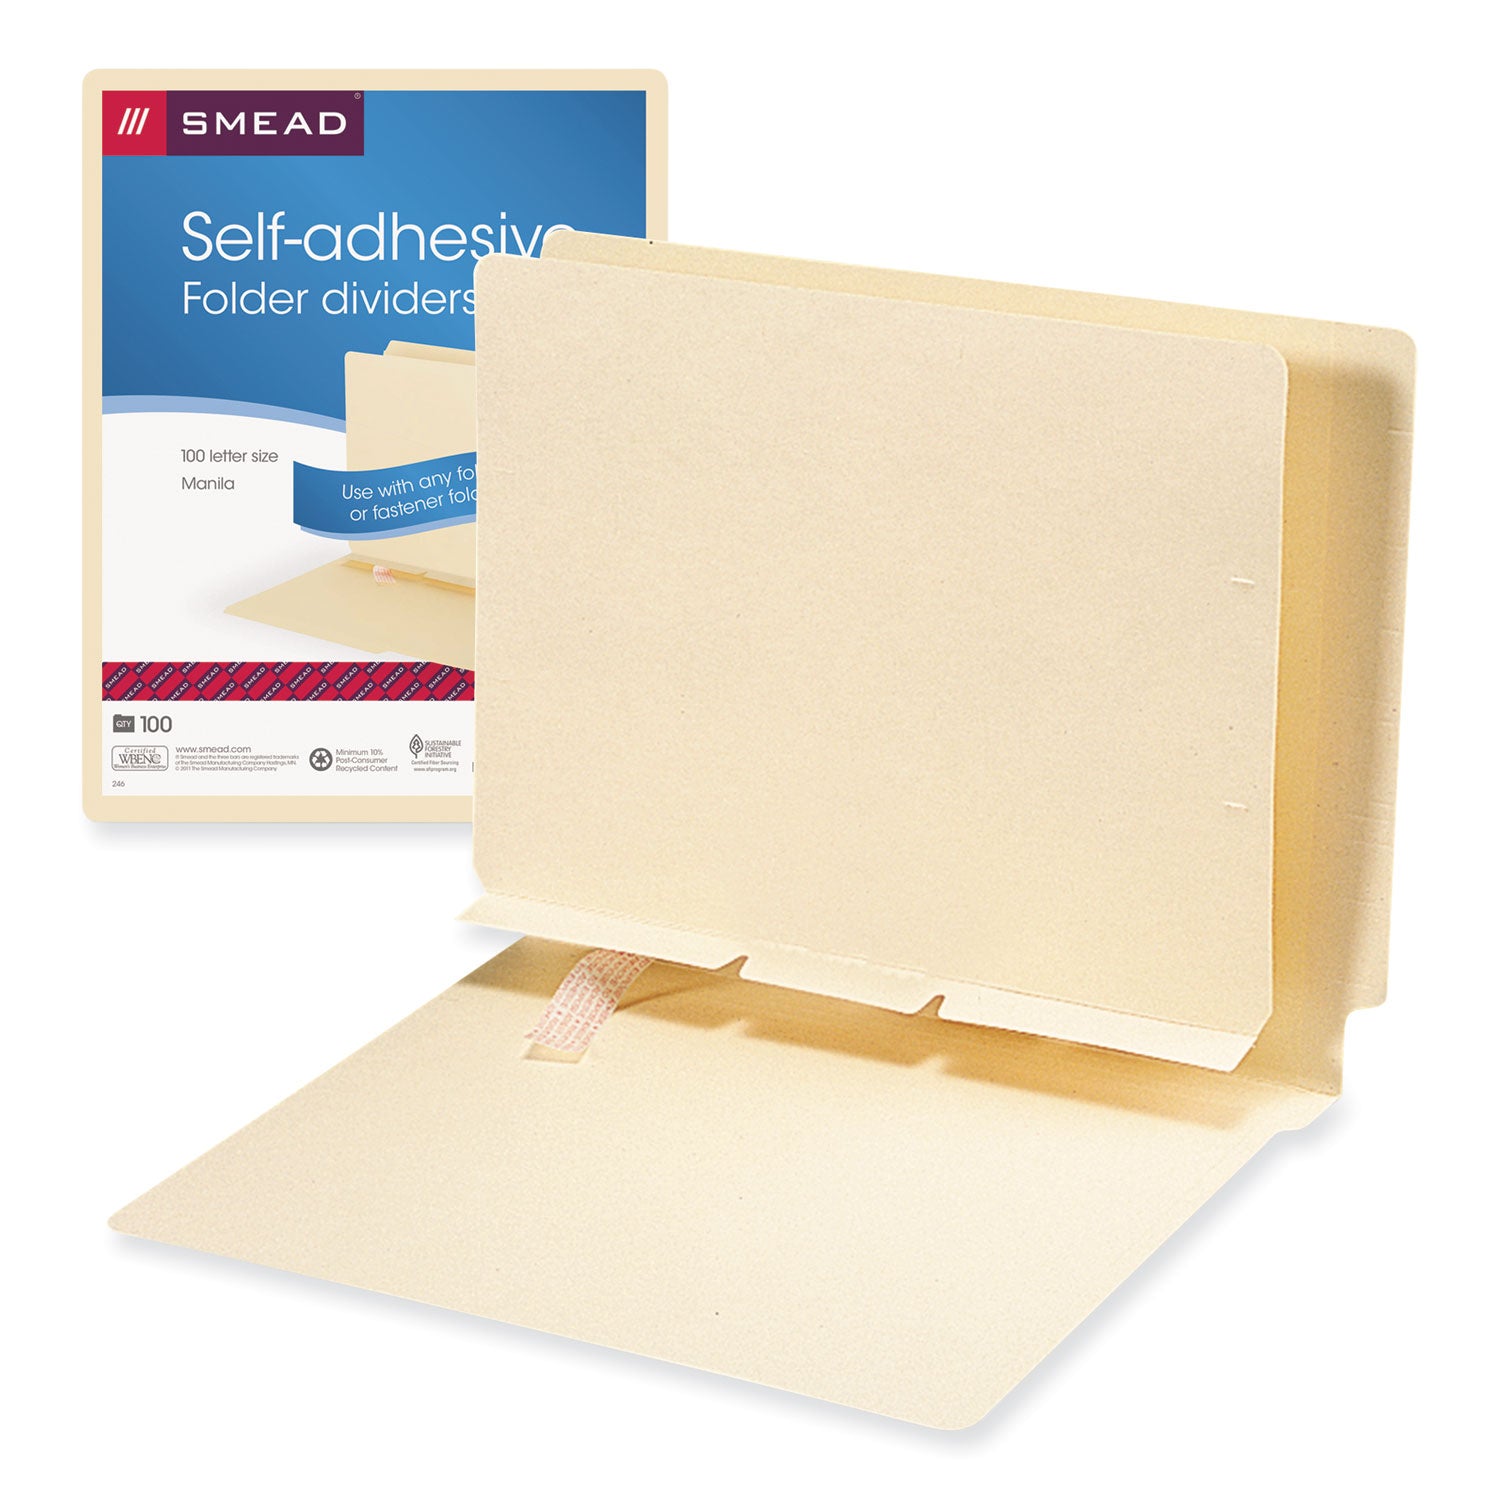 Self-Adhesive Folder Dividers for Top/End Tab Folders, Prepunched for Fasteners, 1 Fastener, Letter Size, Manila, 100/Box - 